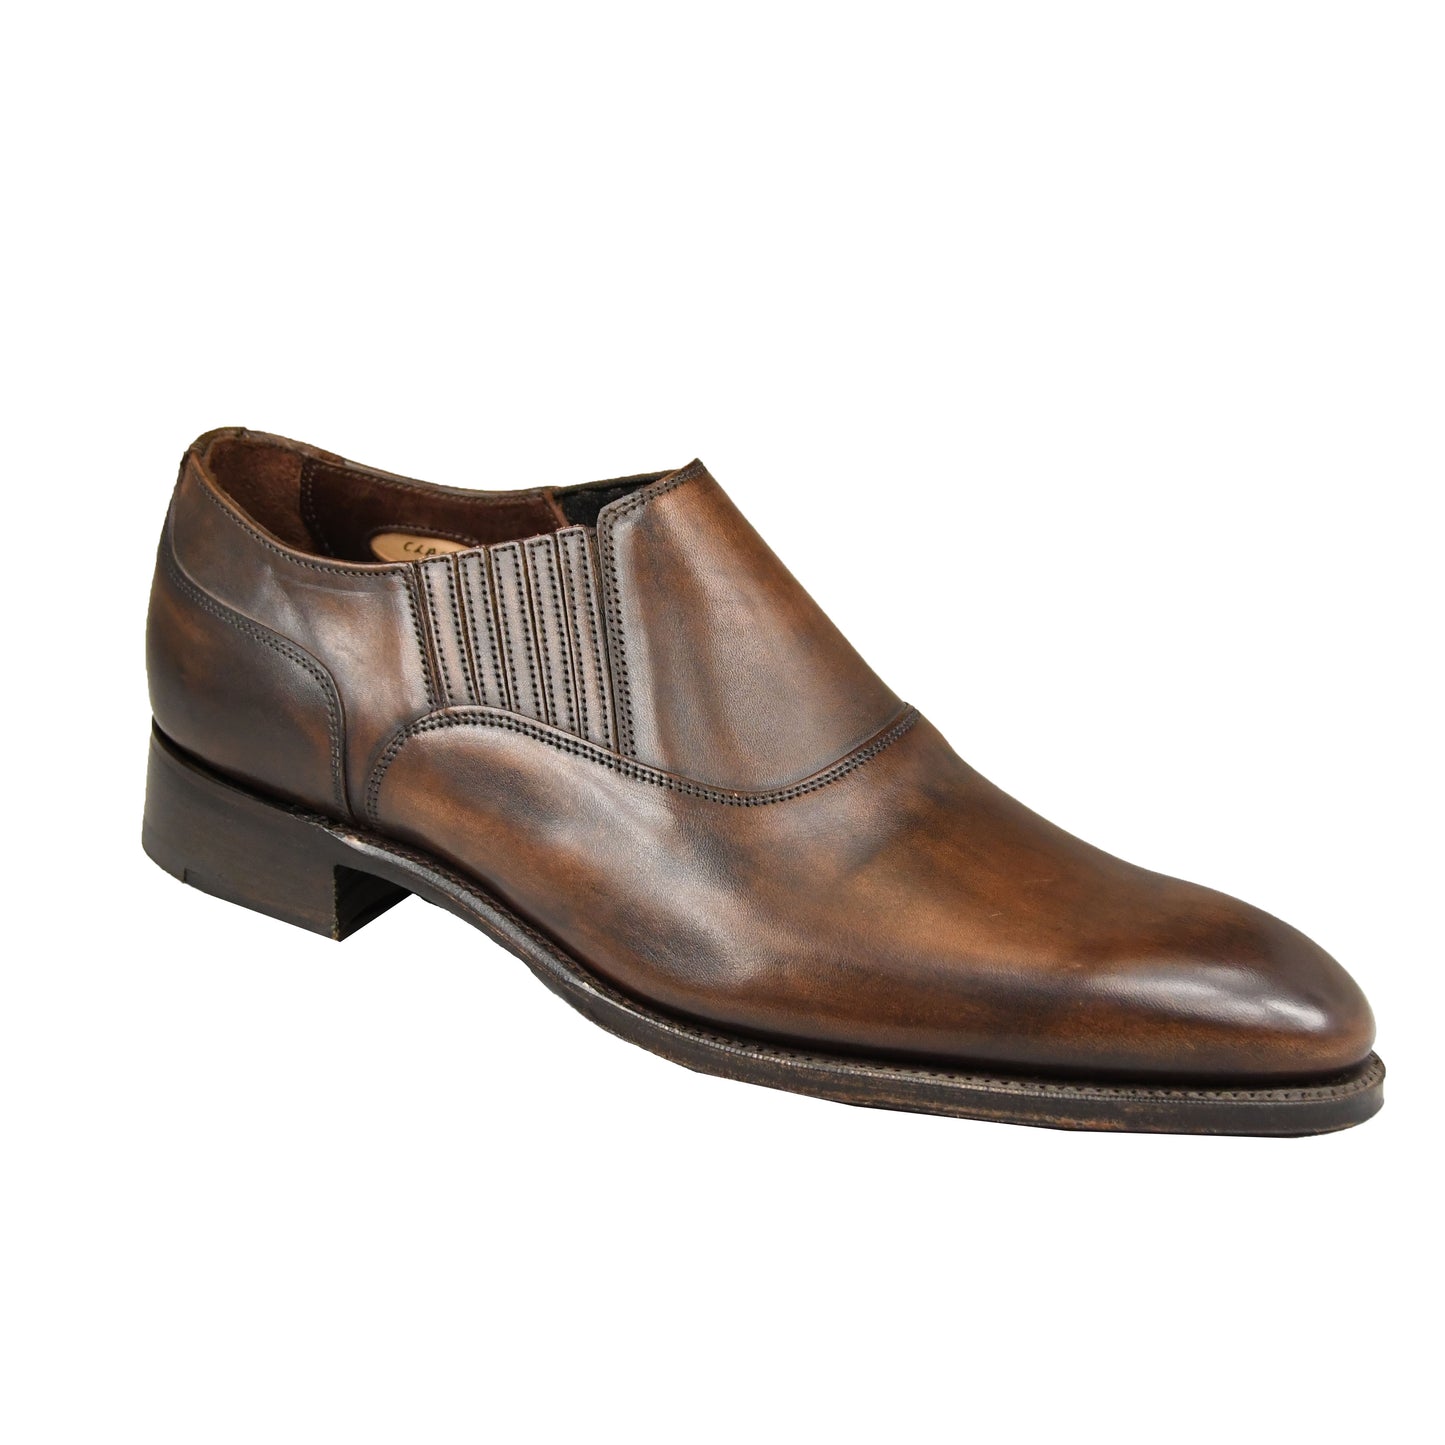 Clarence Bronzed Calf, Joseph Cheaney & Sons